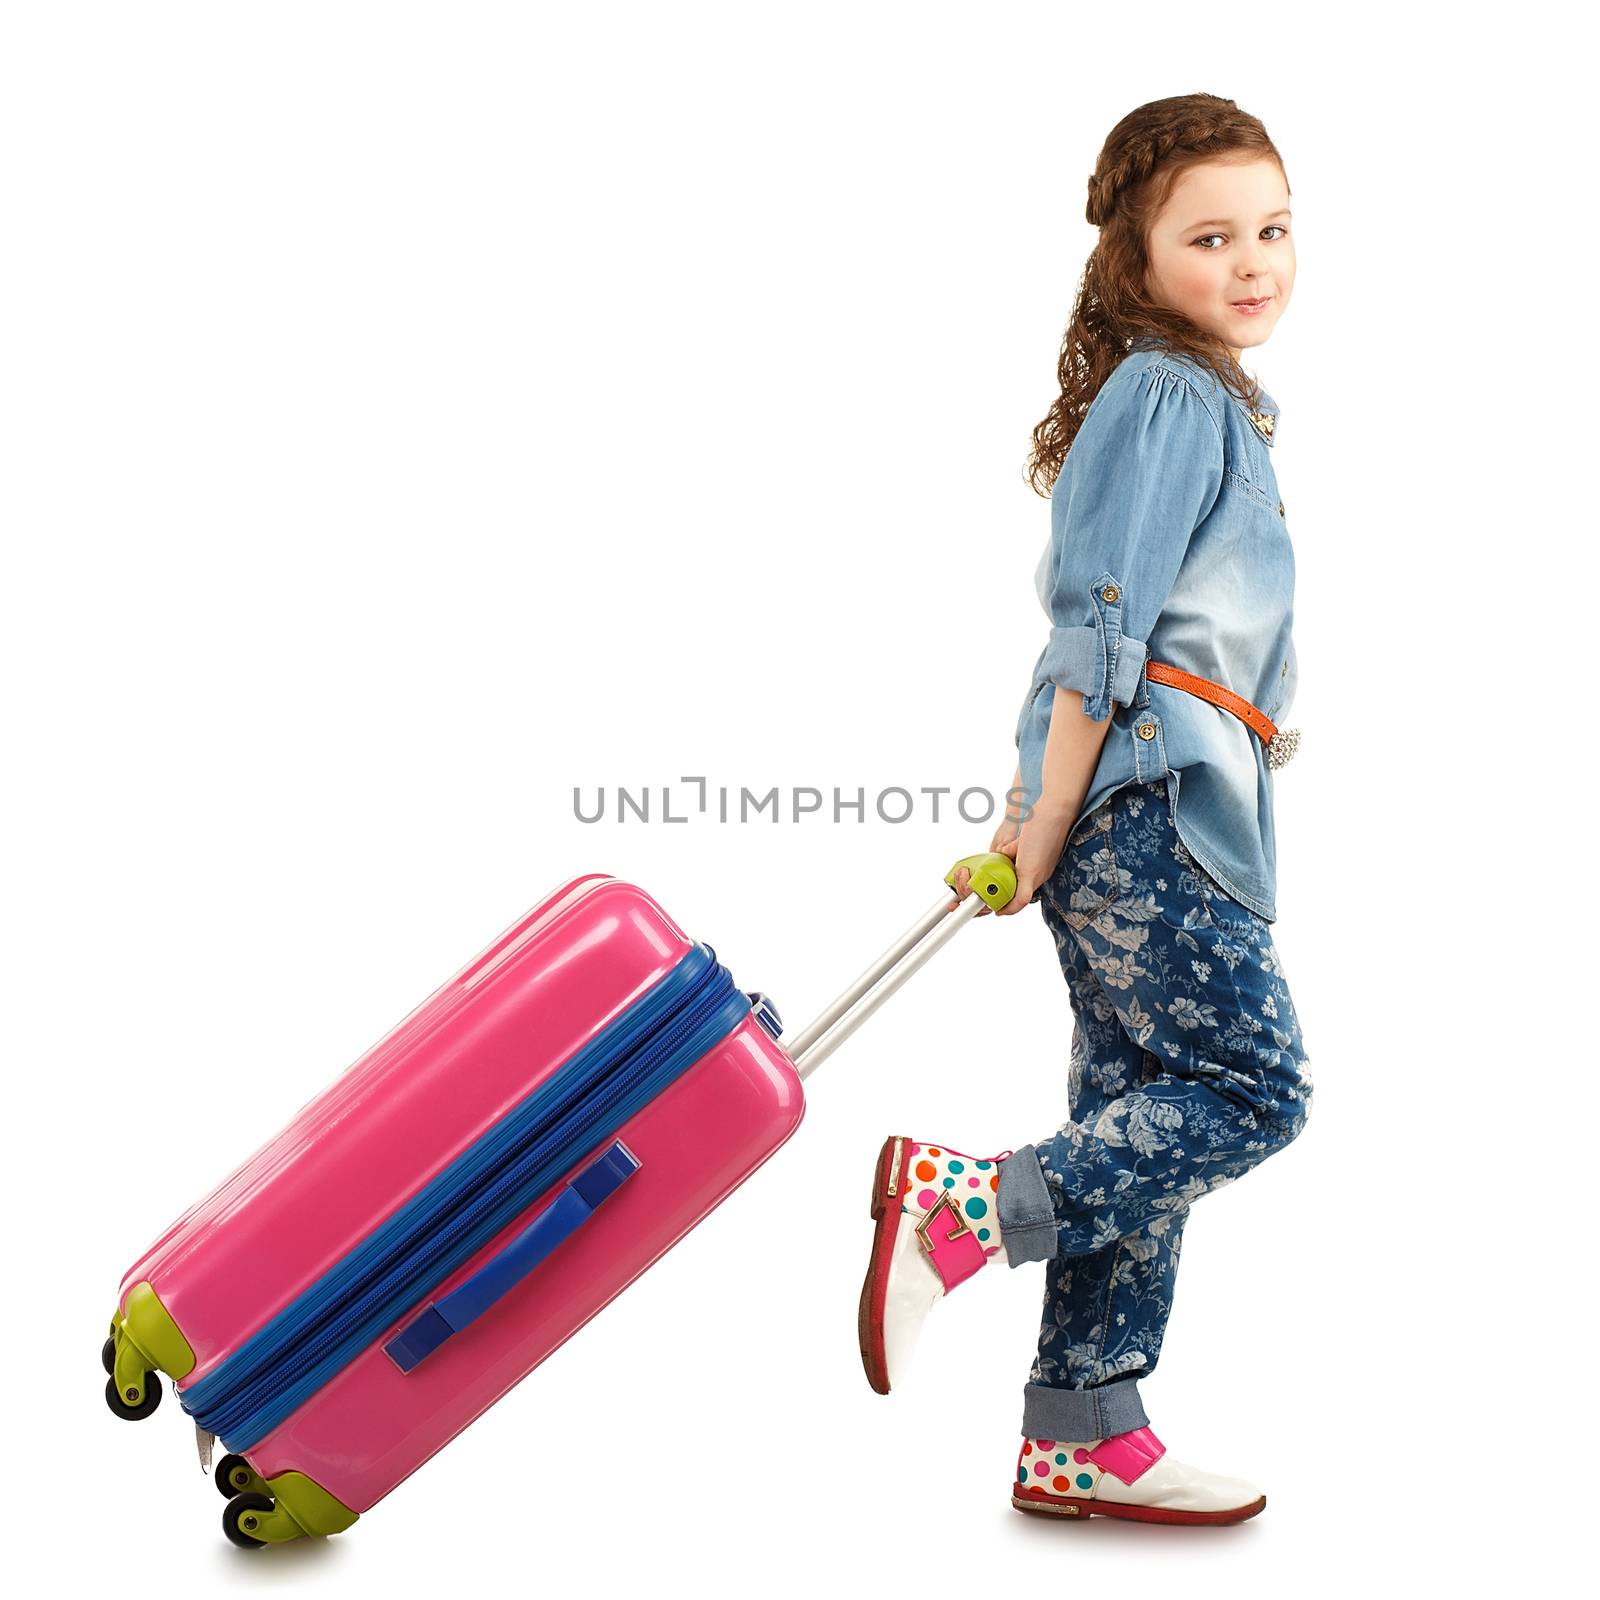 Full-length portrait of a pretty little girl with big pink suitcase on wheels isolated on white background. Concept holidays and vacations.